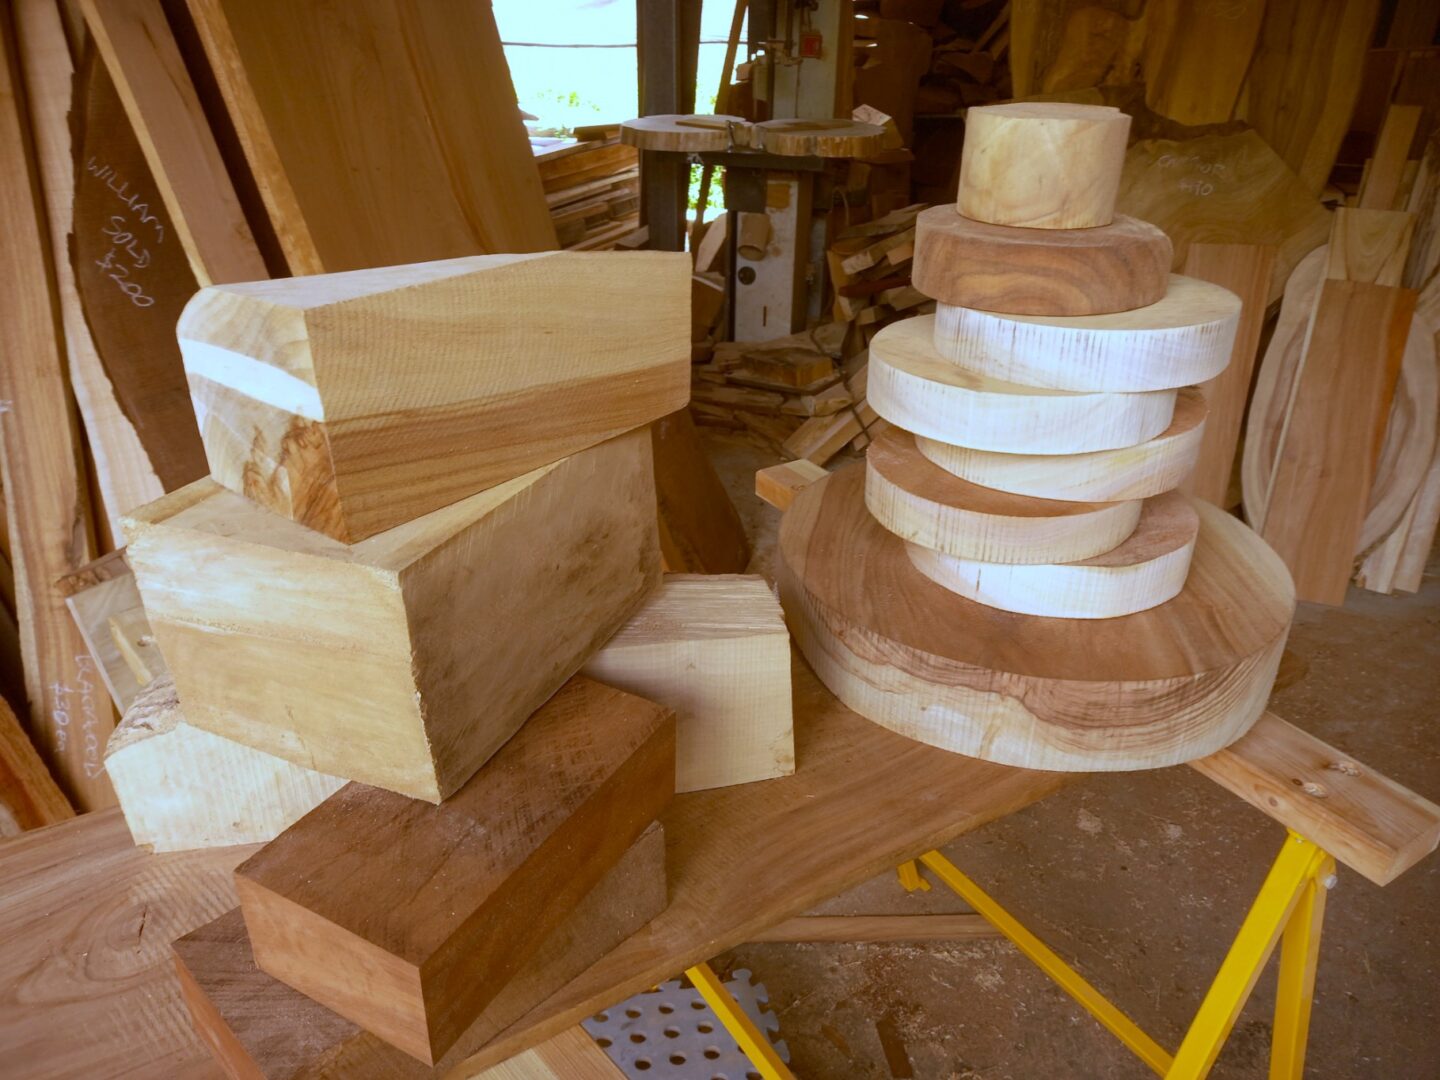 turning and carving